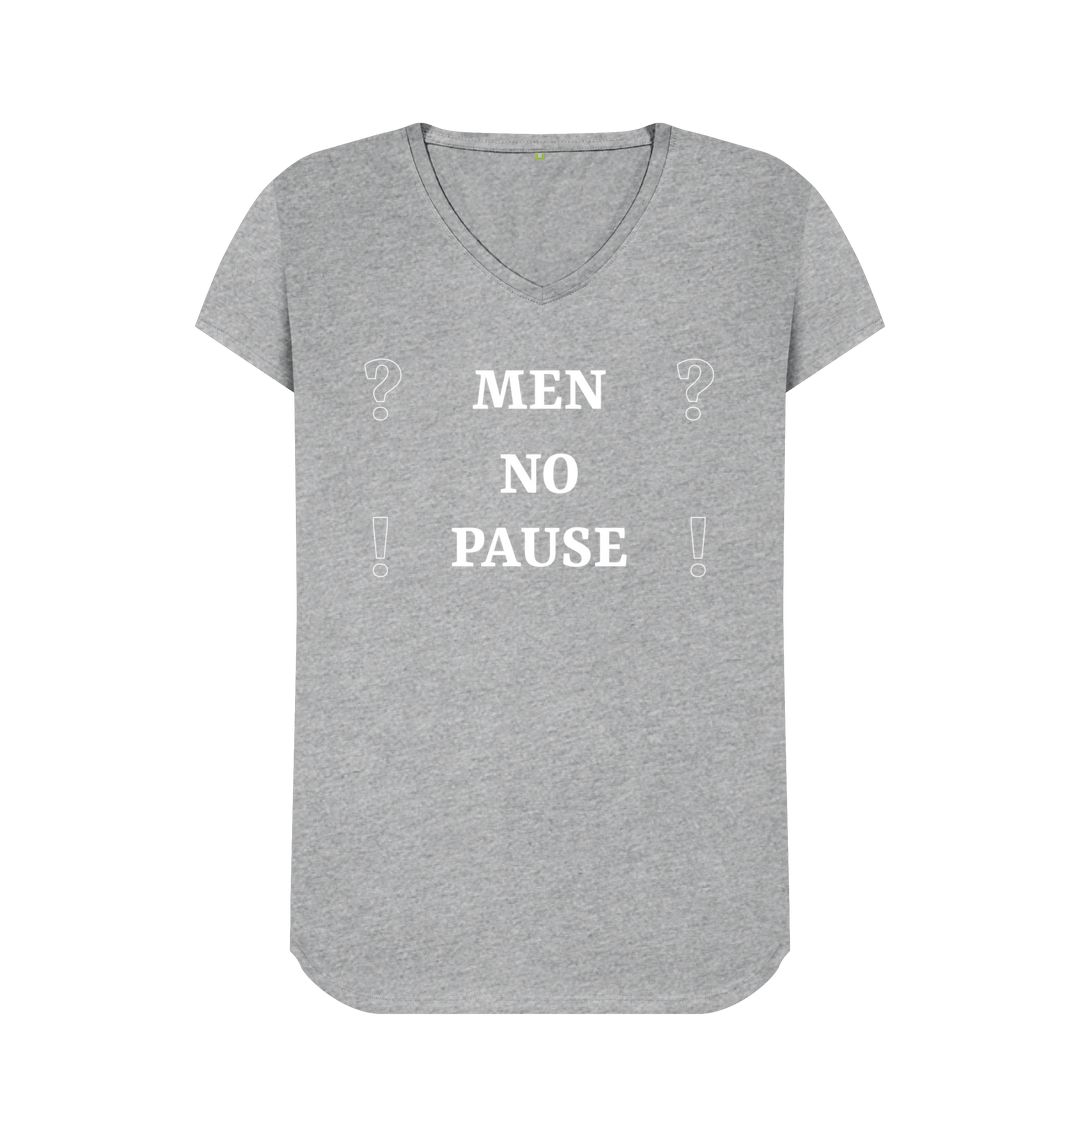 Athletic Grey Men No Pause womens fit V-neck